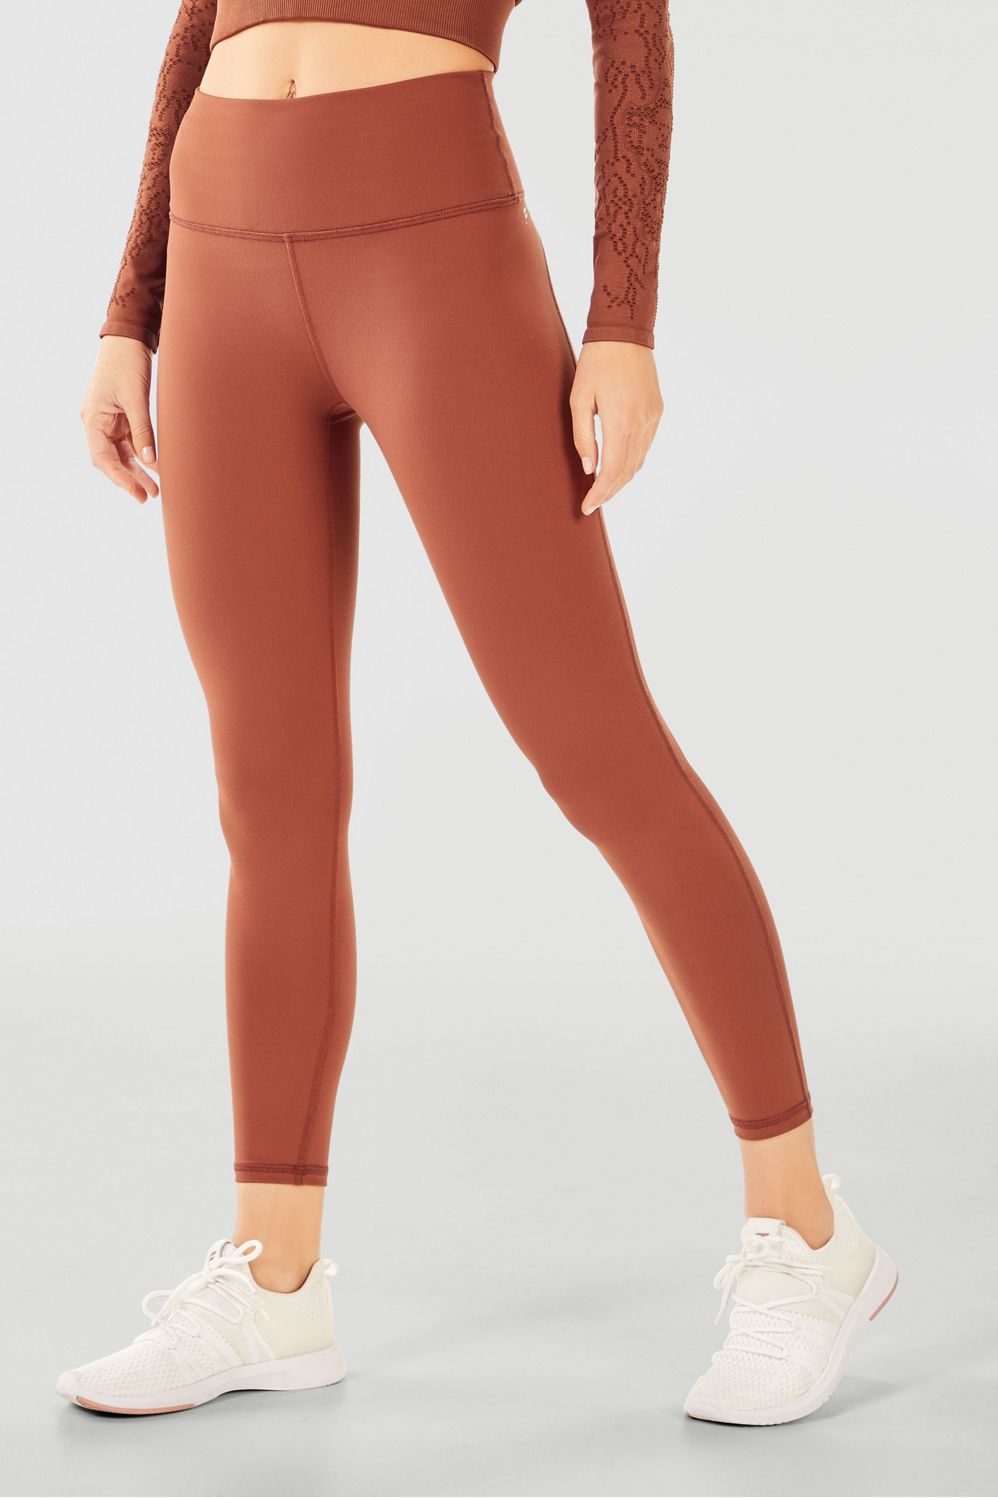 Fabletics Define High-Waisted Legging Womens Shallow Size